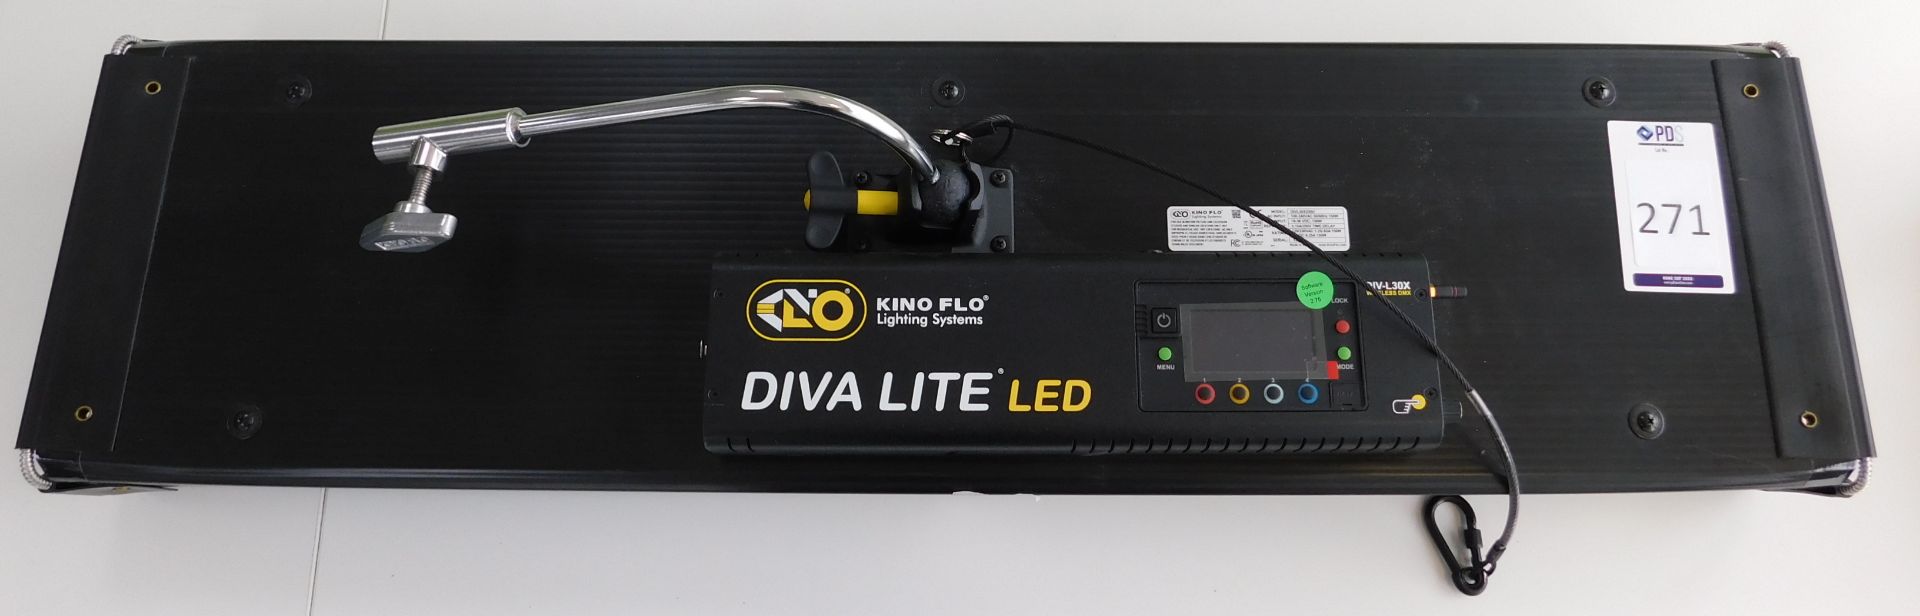 Kino Flo DIV-L30X Diva Lite LED (Location: Westminster. Please Refer to General Notes) - Image 2 of 3